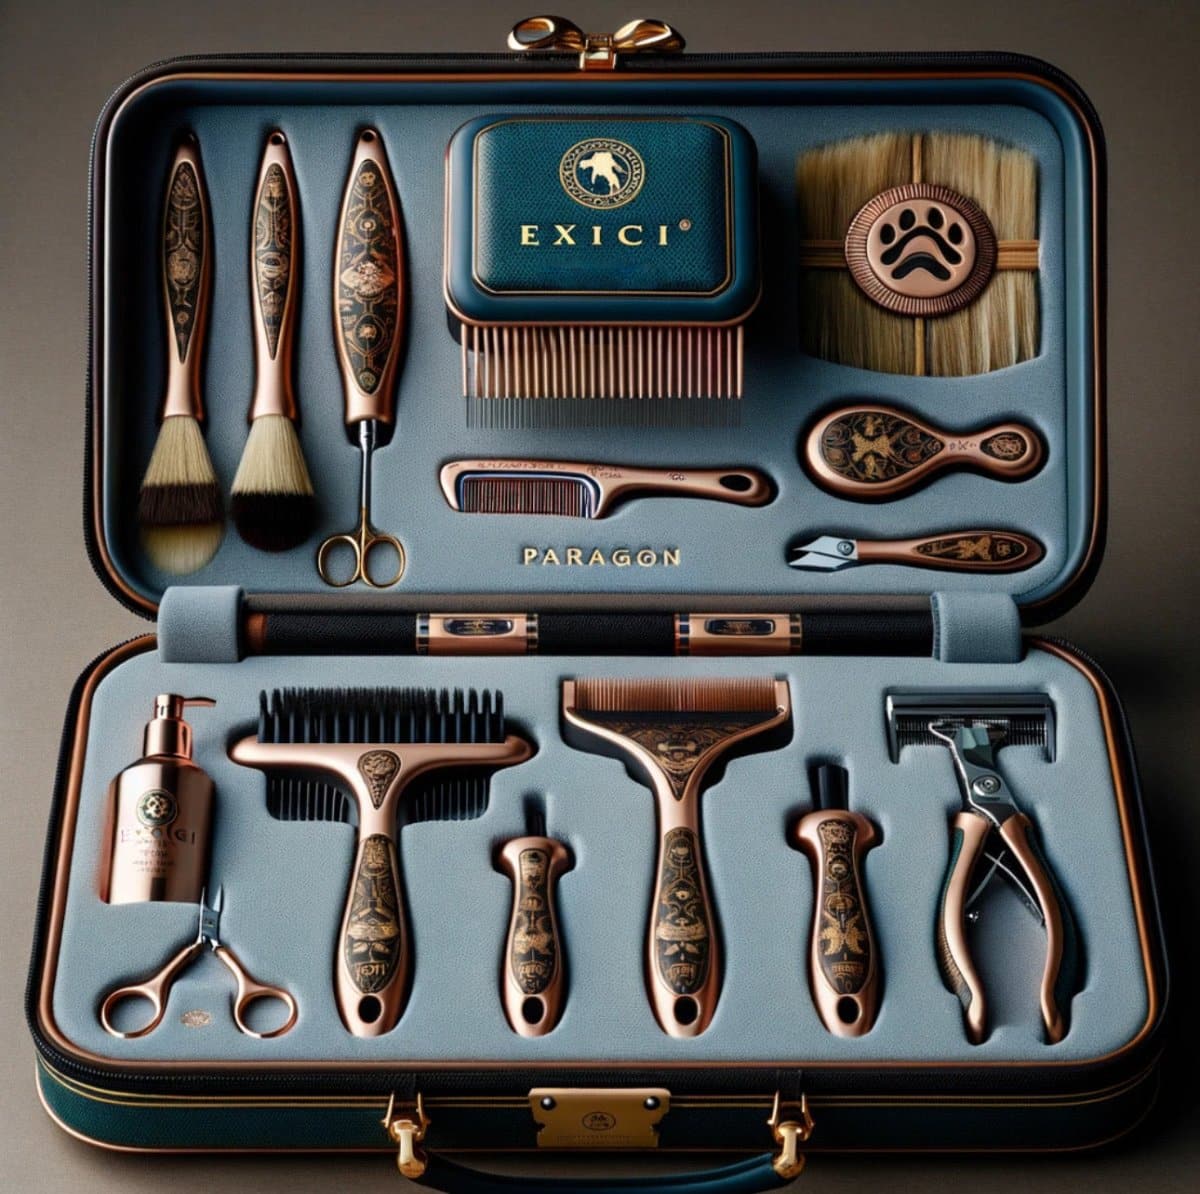 Companion Grooming Collection - Exici